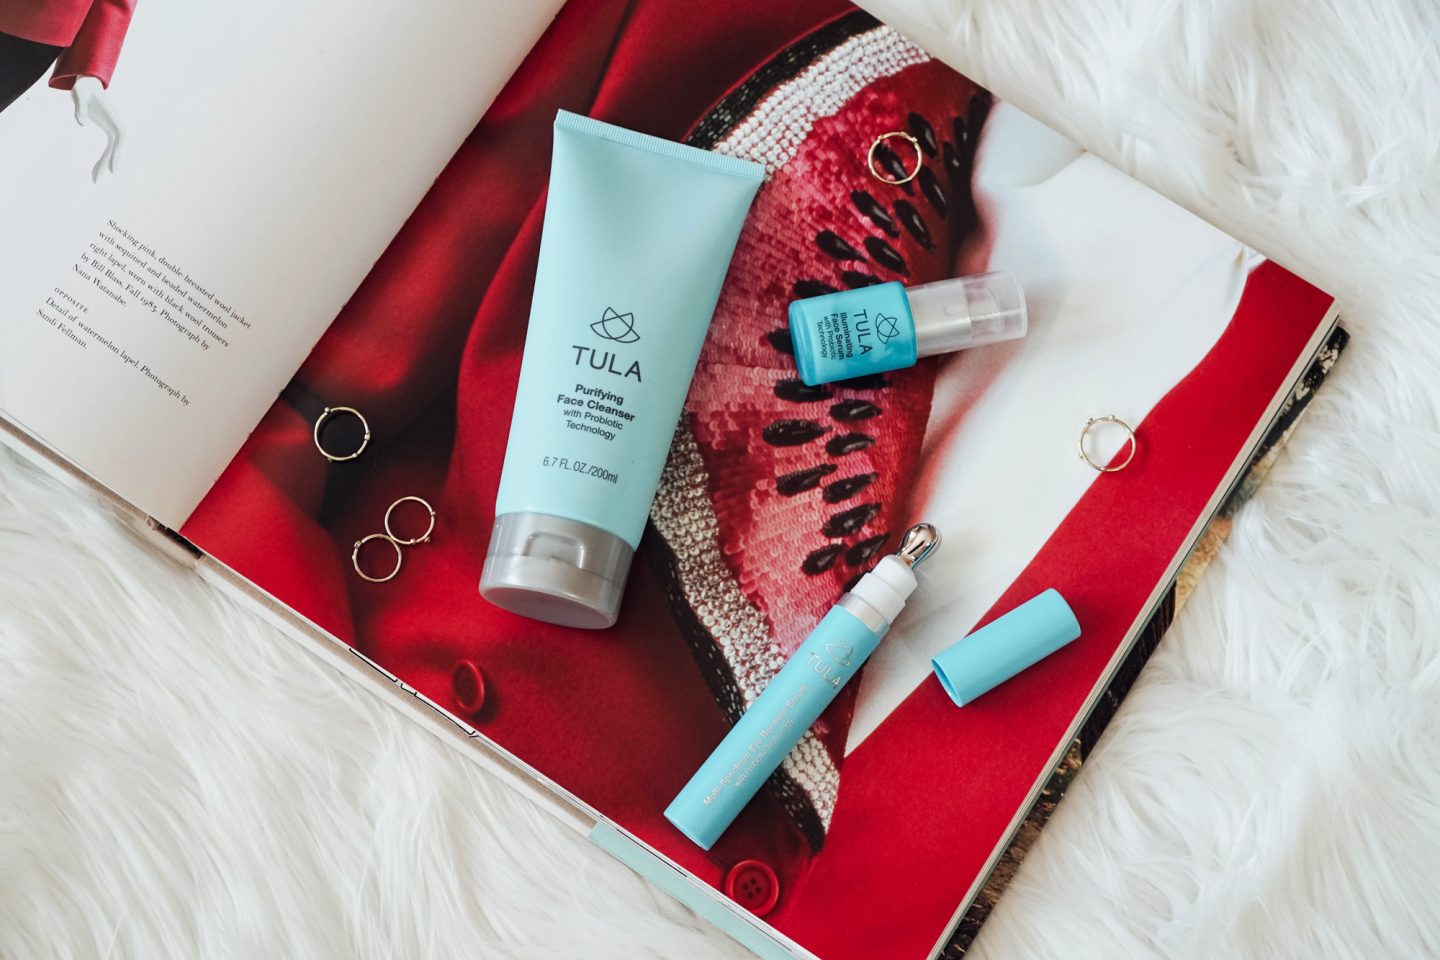 Learn about my favorite skincare line, Tula, that uses probiotic technology to treat your skin, and is free of parabens, mineral oil, petrolatum, phthalates and propylene glycol! 